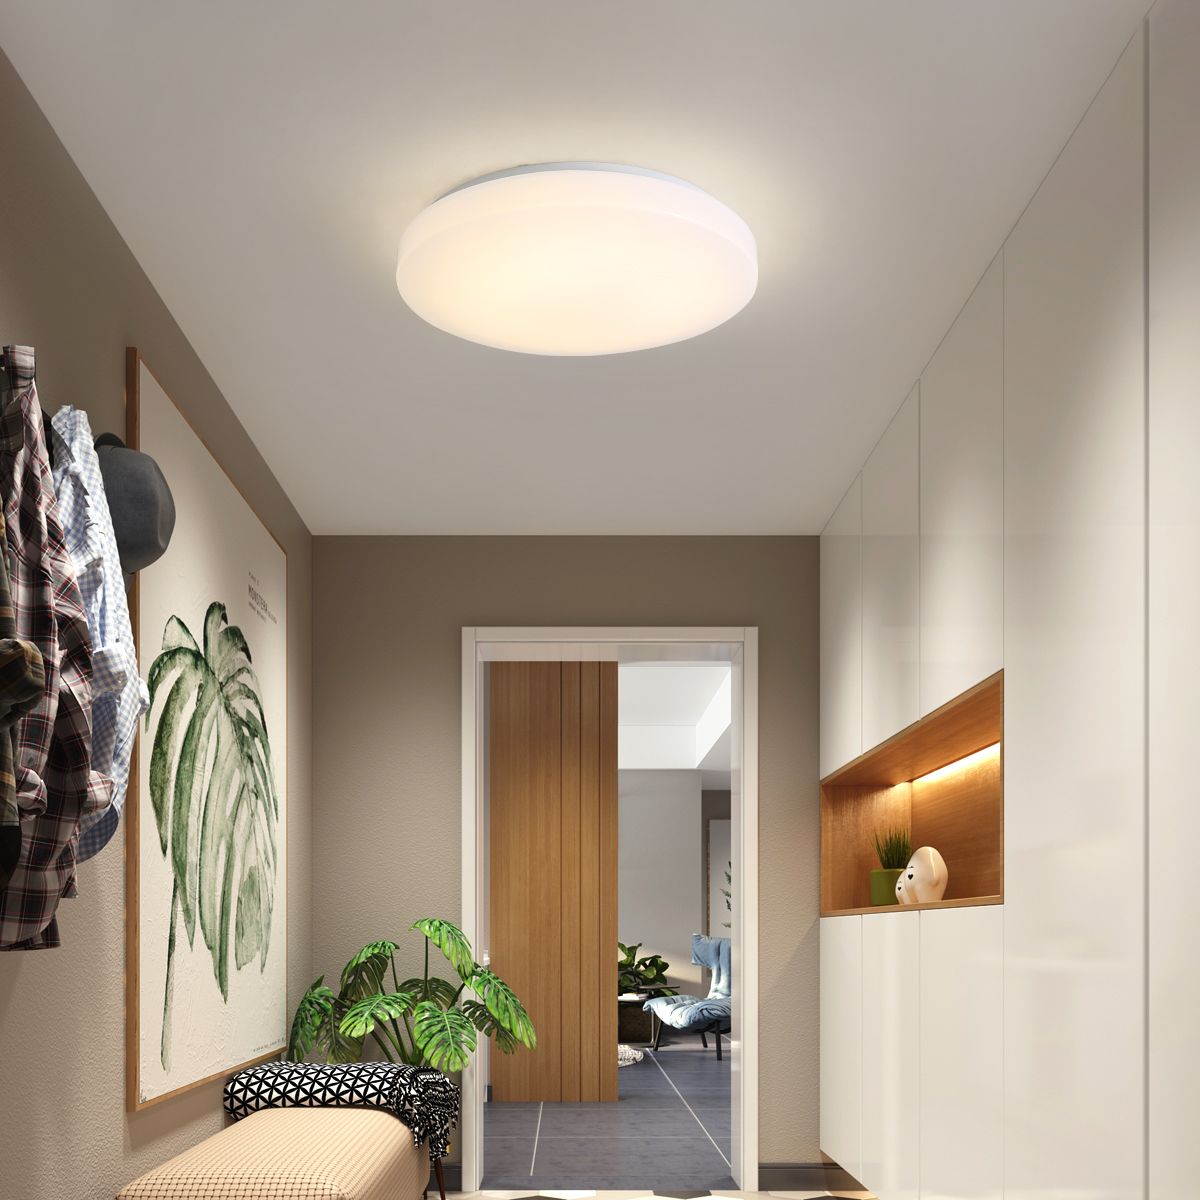 2019 Led Round Bread Ceiling Light Modern Contracted Bedroom Corridor Living Room Light Balcony Kitchen Bathroom Lamp Lamp Lighting Lamps From